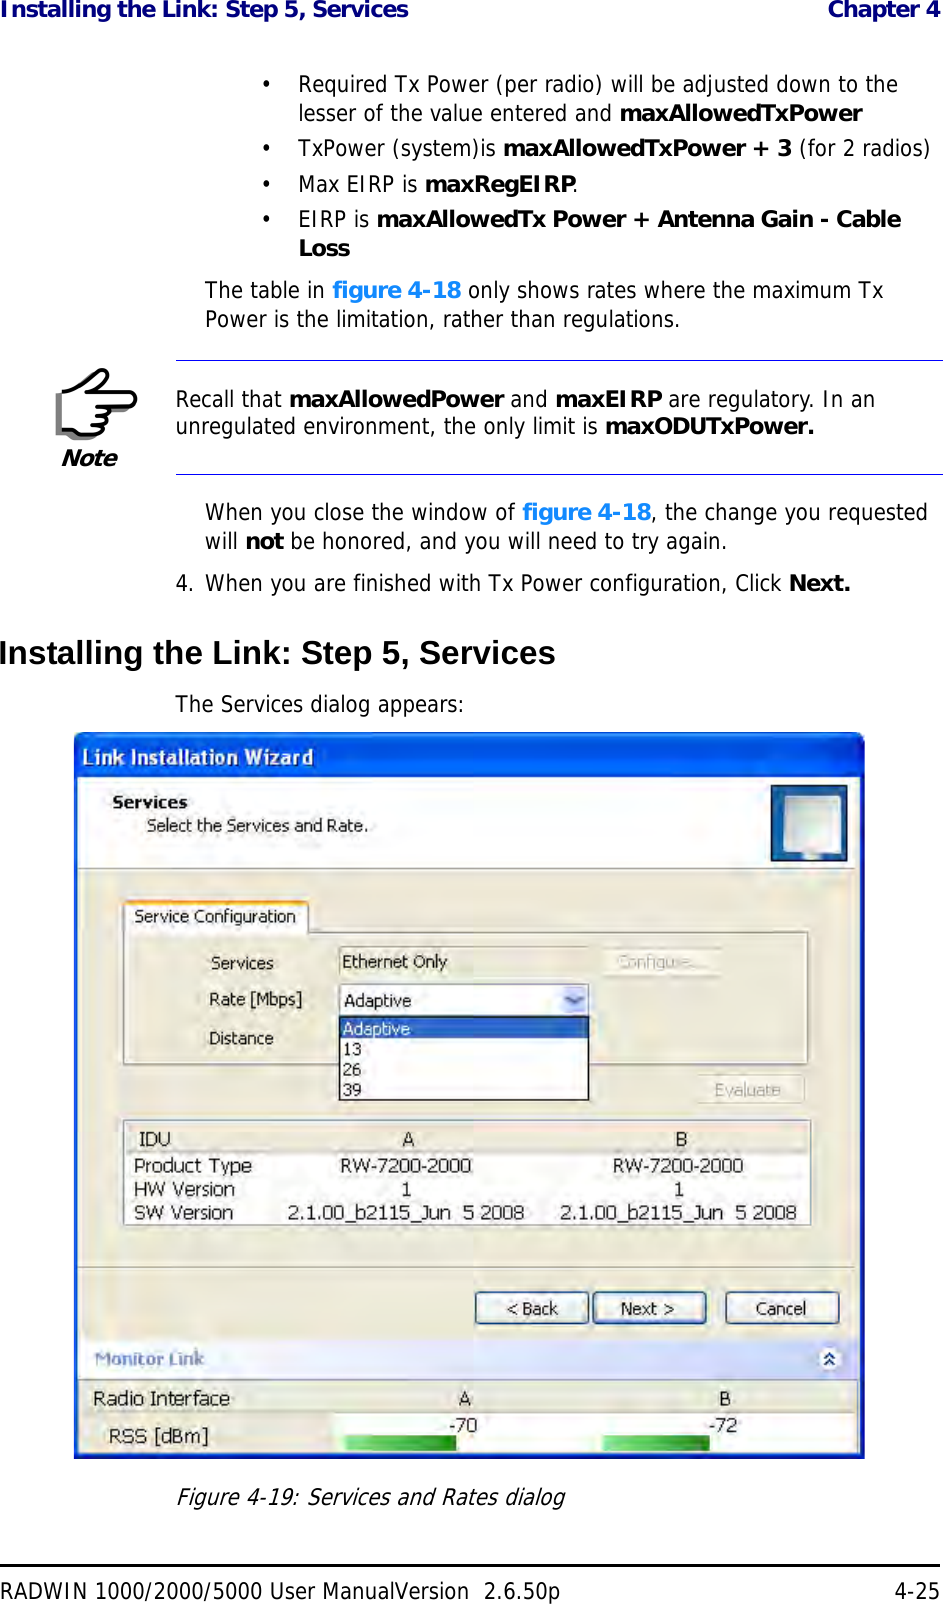 Installing the Link: Step 5, Services  Chapter 4RADWIN 1000/2000/5000 User ManualVersion  2.6.50p 4-25• Required Tx Power (per radio) will be adjusted down to the lesser of the value entered and maxAllowedTxPower•TxPower (system)is maxAllowedTxPower + 3 (for 2 radios)•Max EIRP is maxRegEIRP.•EIRP is maxAllowedTx Power + Antenna Gain - Cable LossThe table in figure 4-18 only shows rates where the maximum Tx Power is the limitation, rather than regulations.When you close the window of figure 4-18, the change you requested will not be honored, and you will need to try again.4. When you are finished with Tx Power configuration, Click Next.Installing the Link: Step 5, ServicesThe Services dialog appears:Figure 4-19: Services and Rates dialogNoteRecall that maxAllowedPower and maxEIRP are regulatory. In an unregulated environment, the only limit is maxODUTxPower.